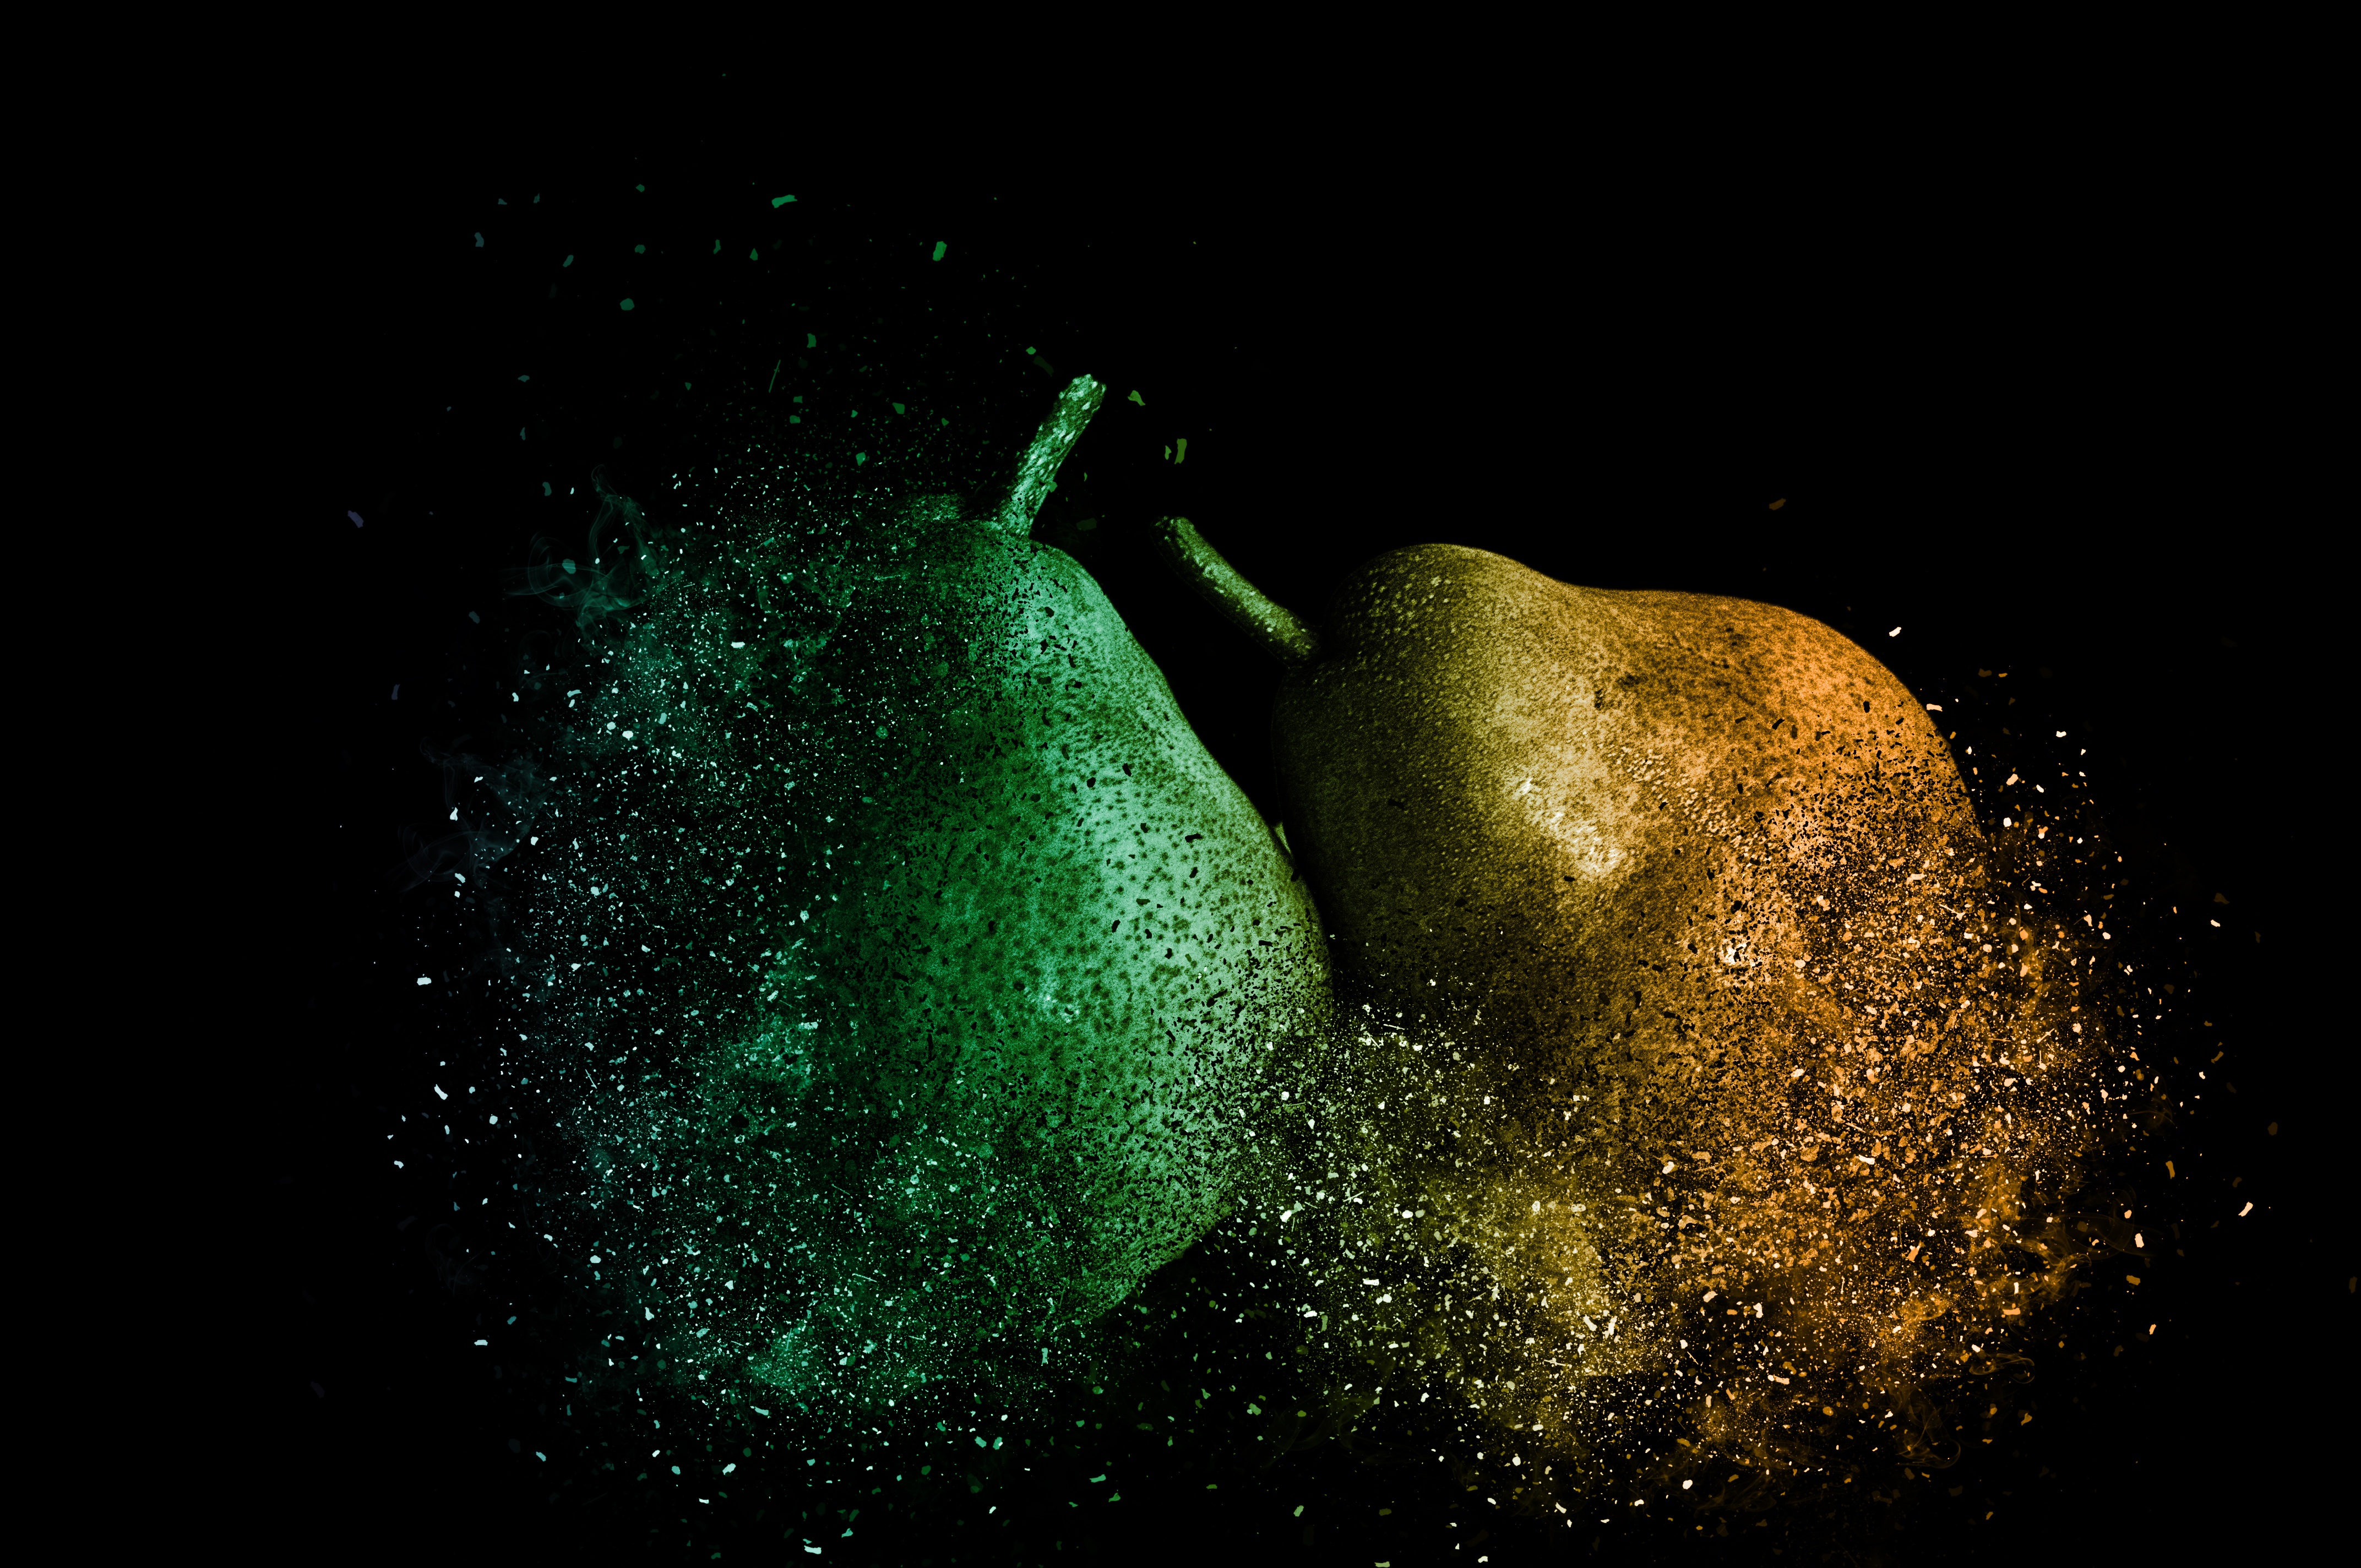 Best Pears wallpapers for phone screen